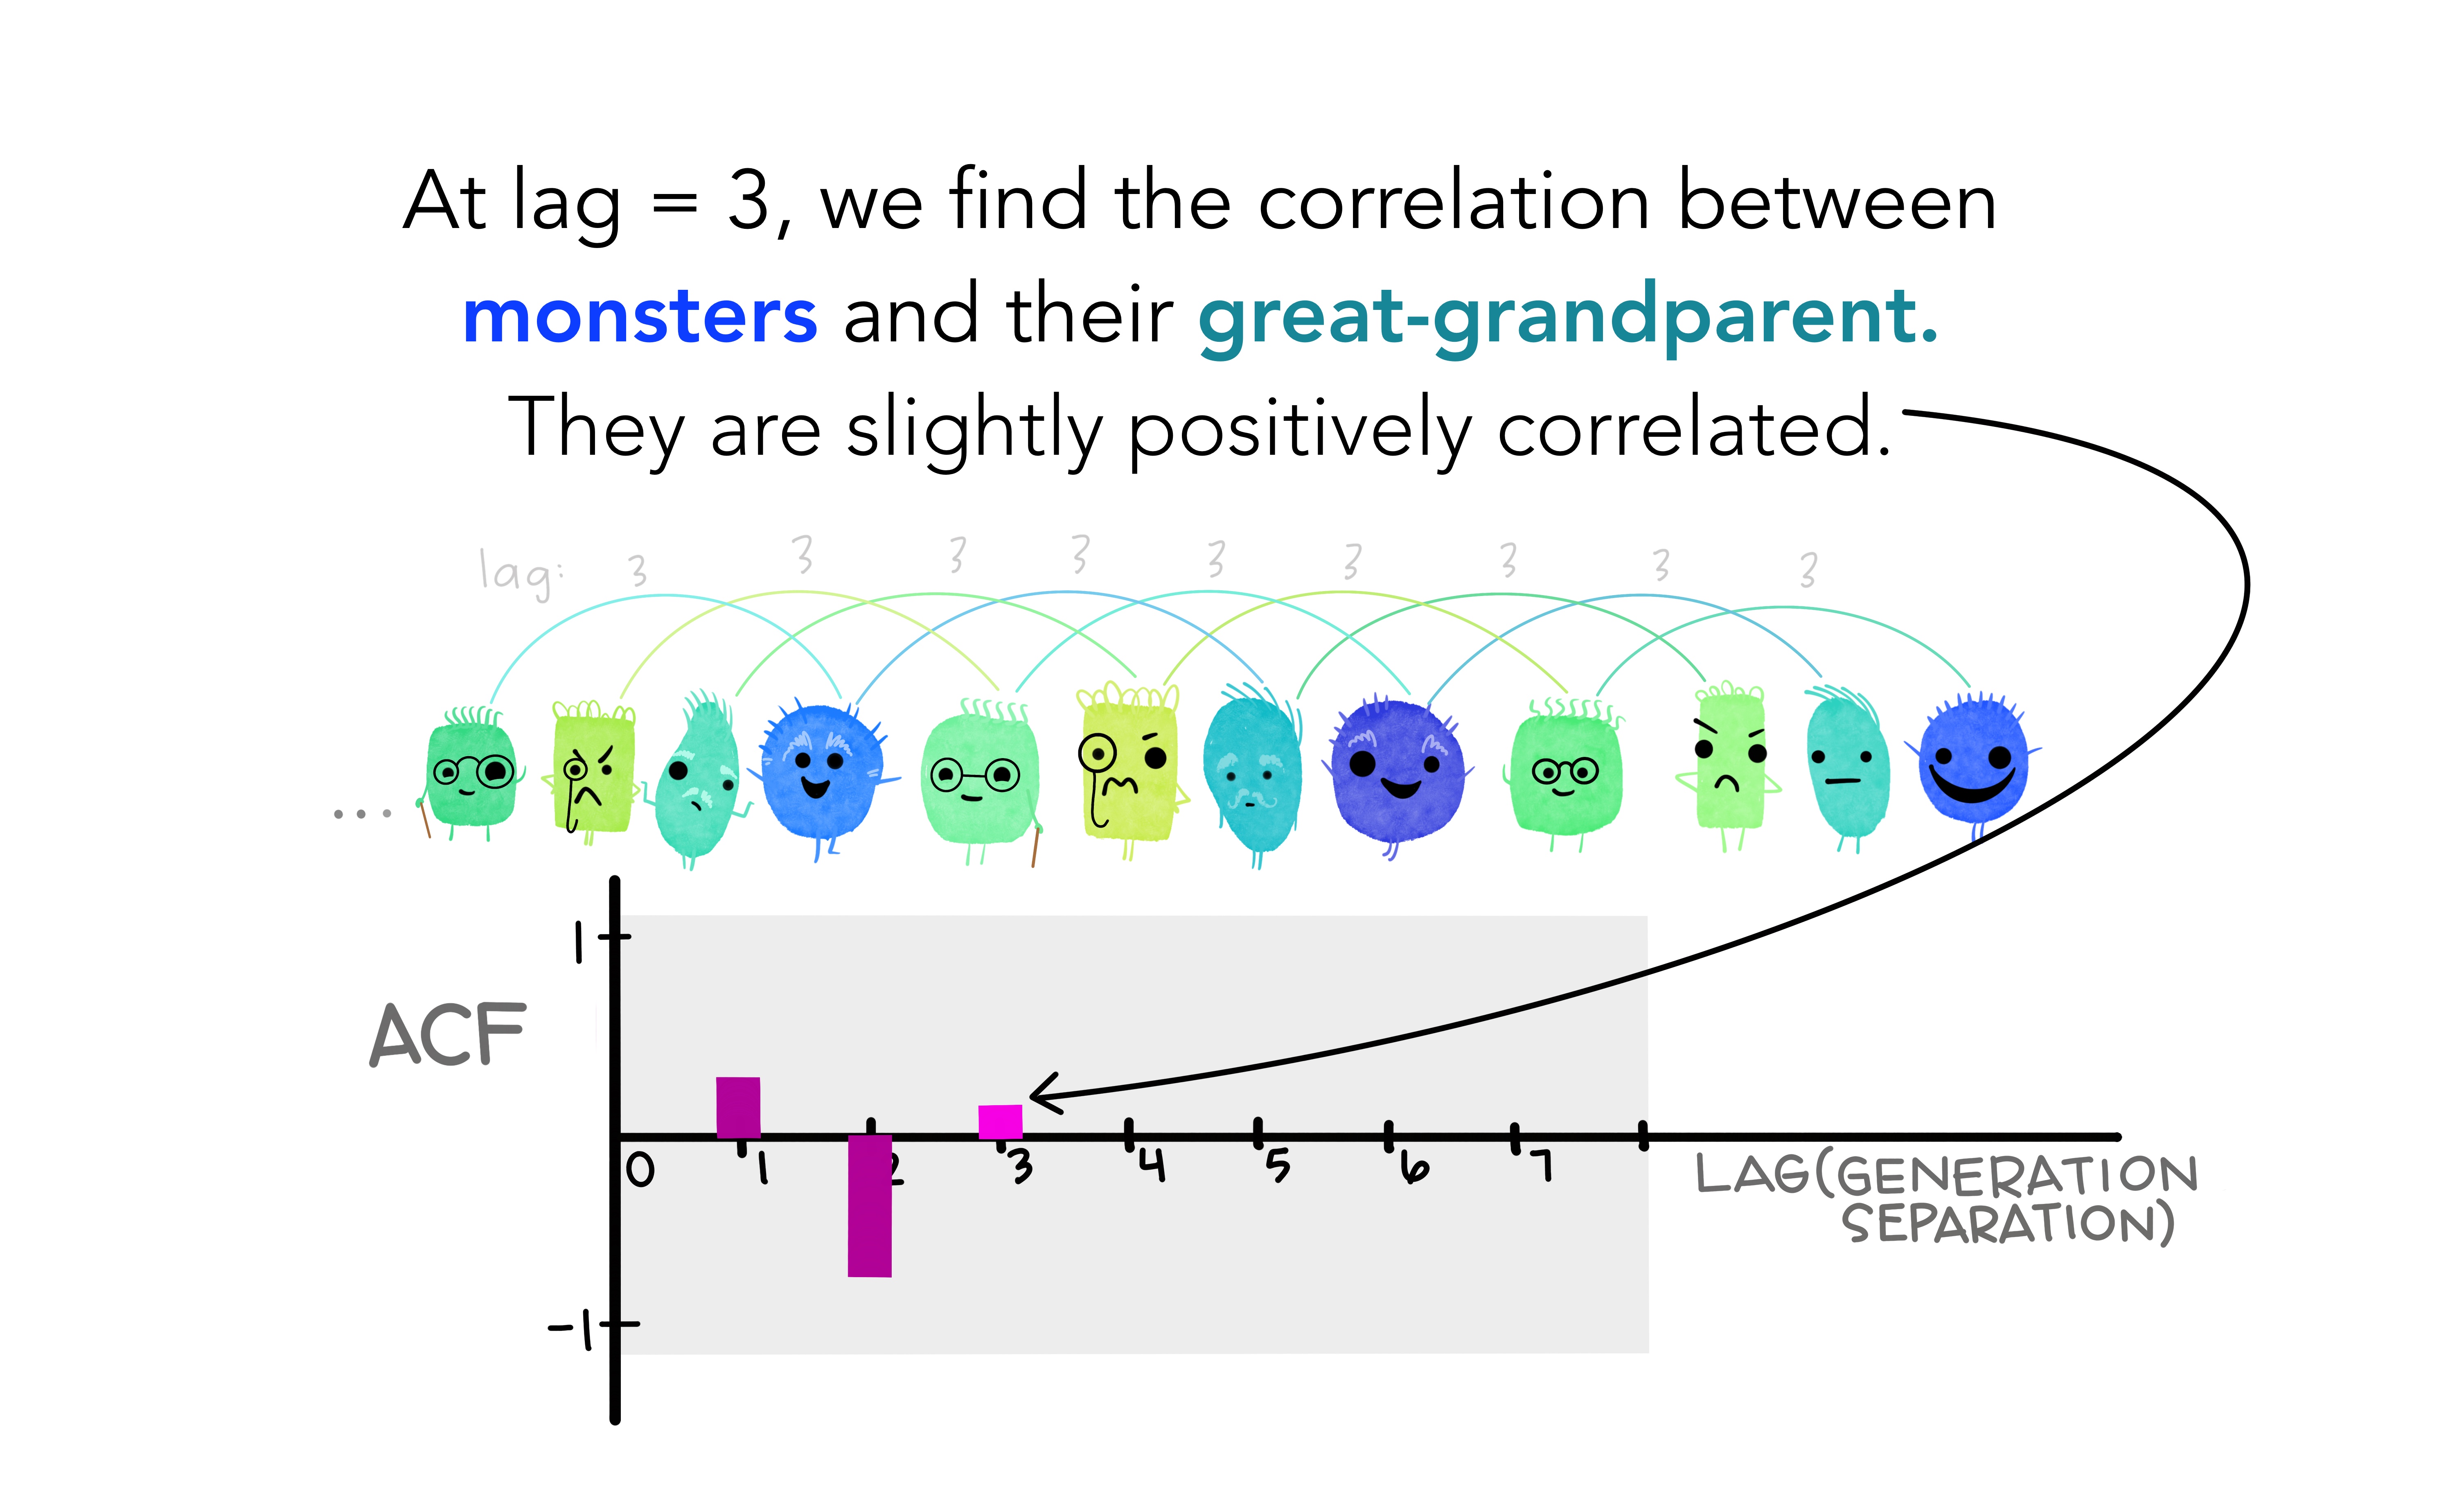 A long series of friendly looking monsters representing generations of their family. An arc with “3” is drawn between each monster and the one at a distance of 3 generations from it (lag = 3). Text reads “At lag = 3, we find the correlation between monsters and their great-grandparent. They are slightly positively correlated.” The ACF plot now has an additional slightly positive bar at Lag = 3, indicating the slight positive correlation between each monster and their great-grandparent.